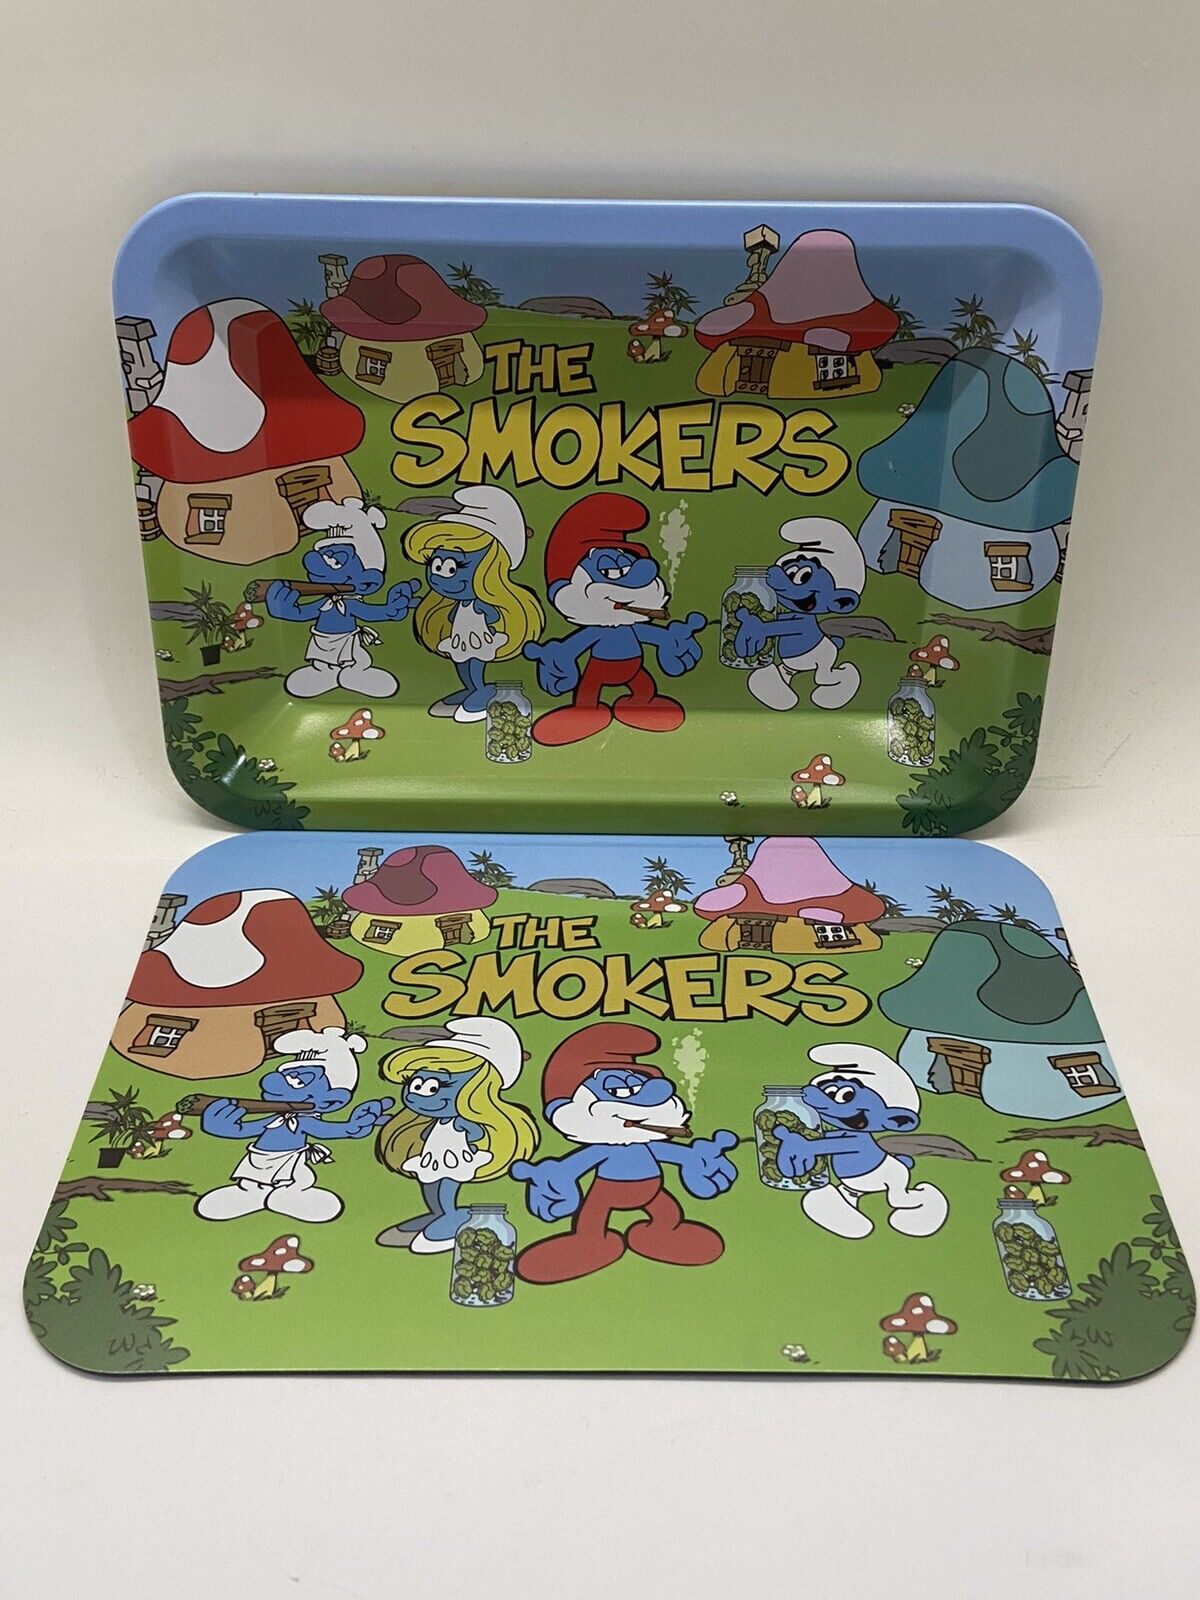 Smurfs Metal Rolling Tray With Matching Magnet Lid - 5x7 Inches